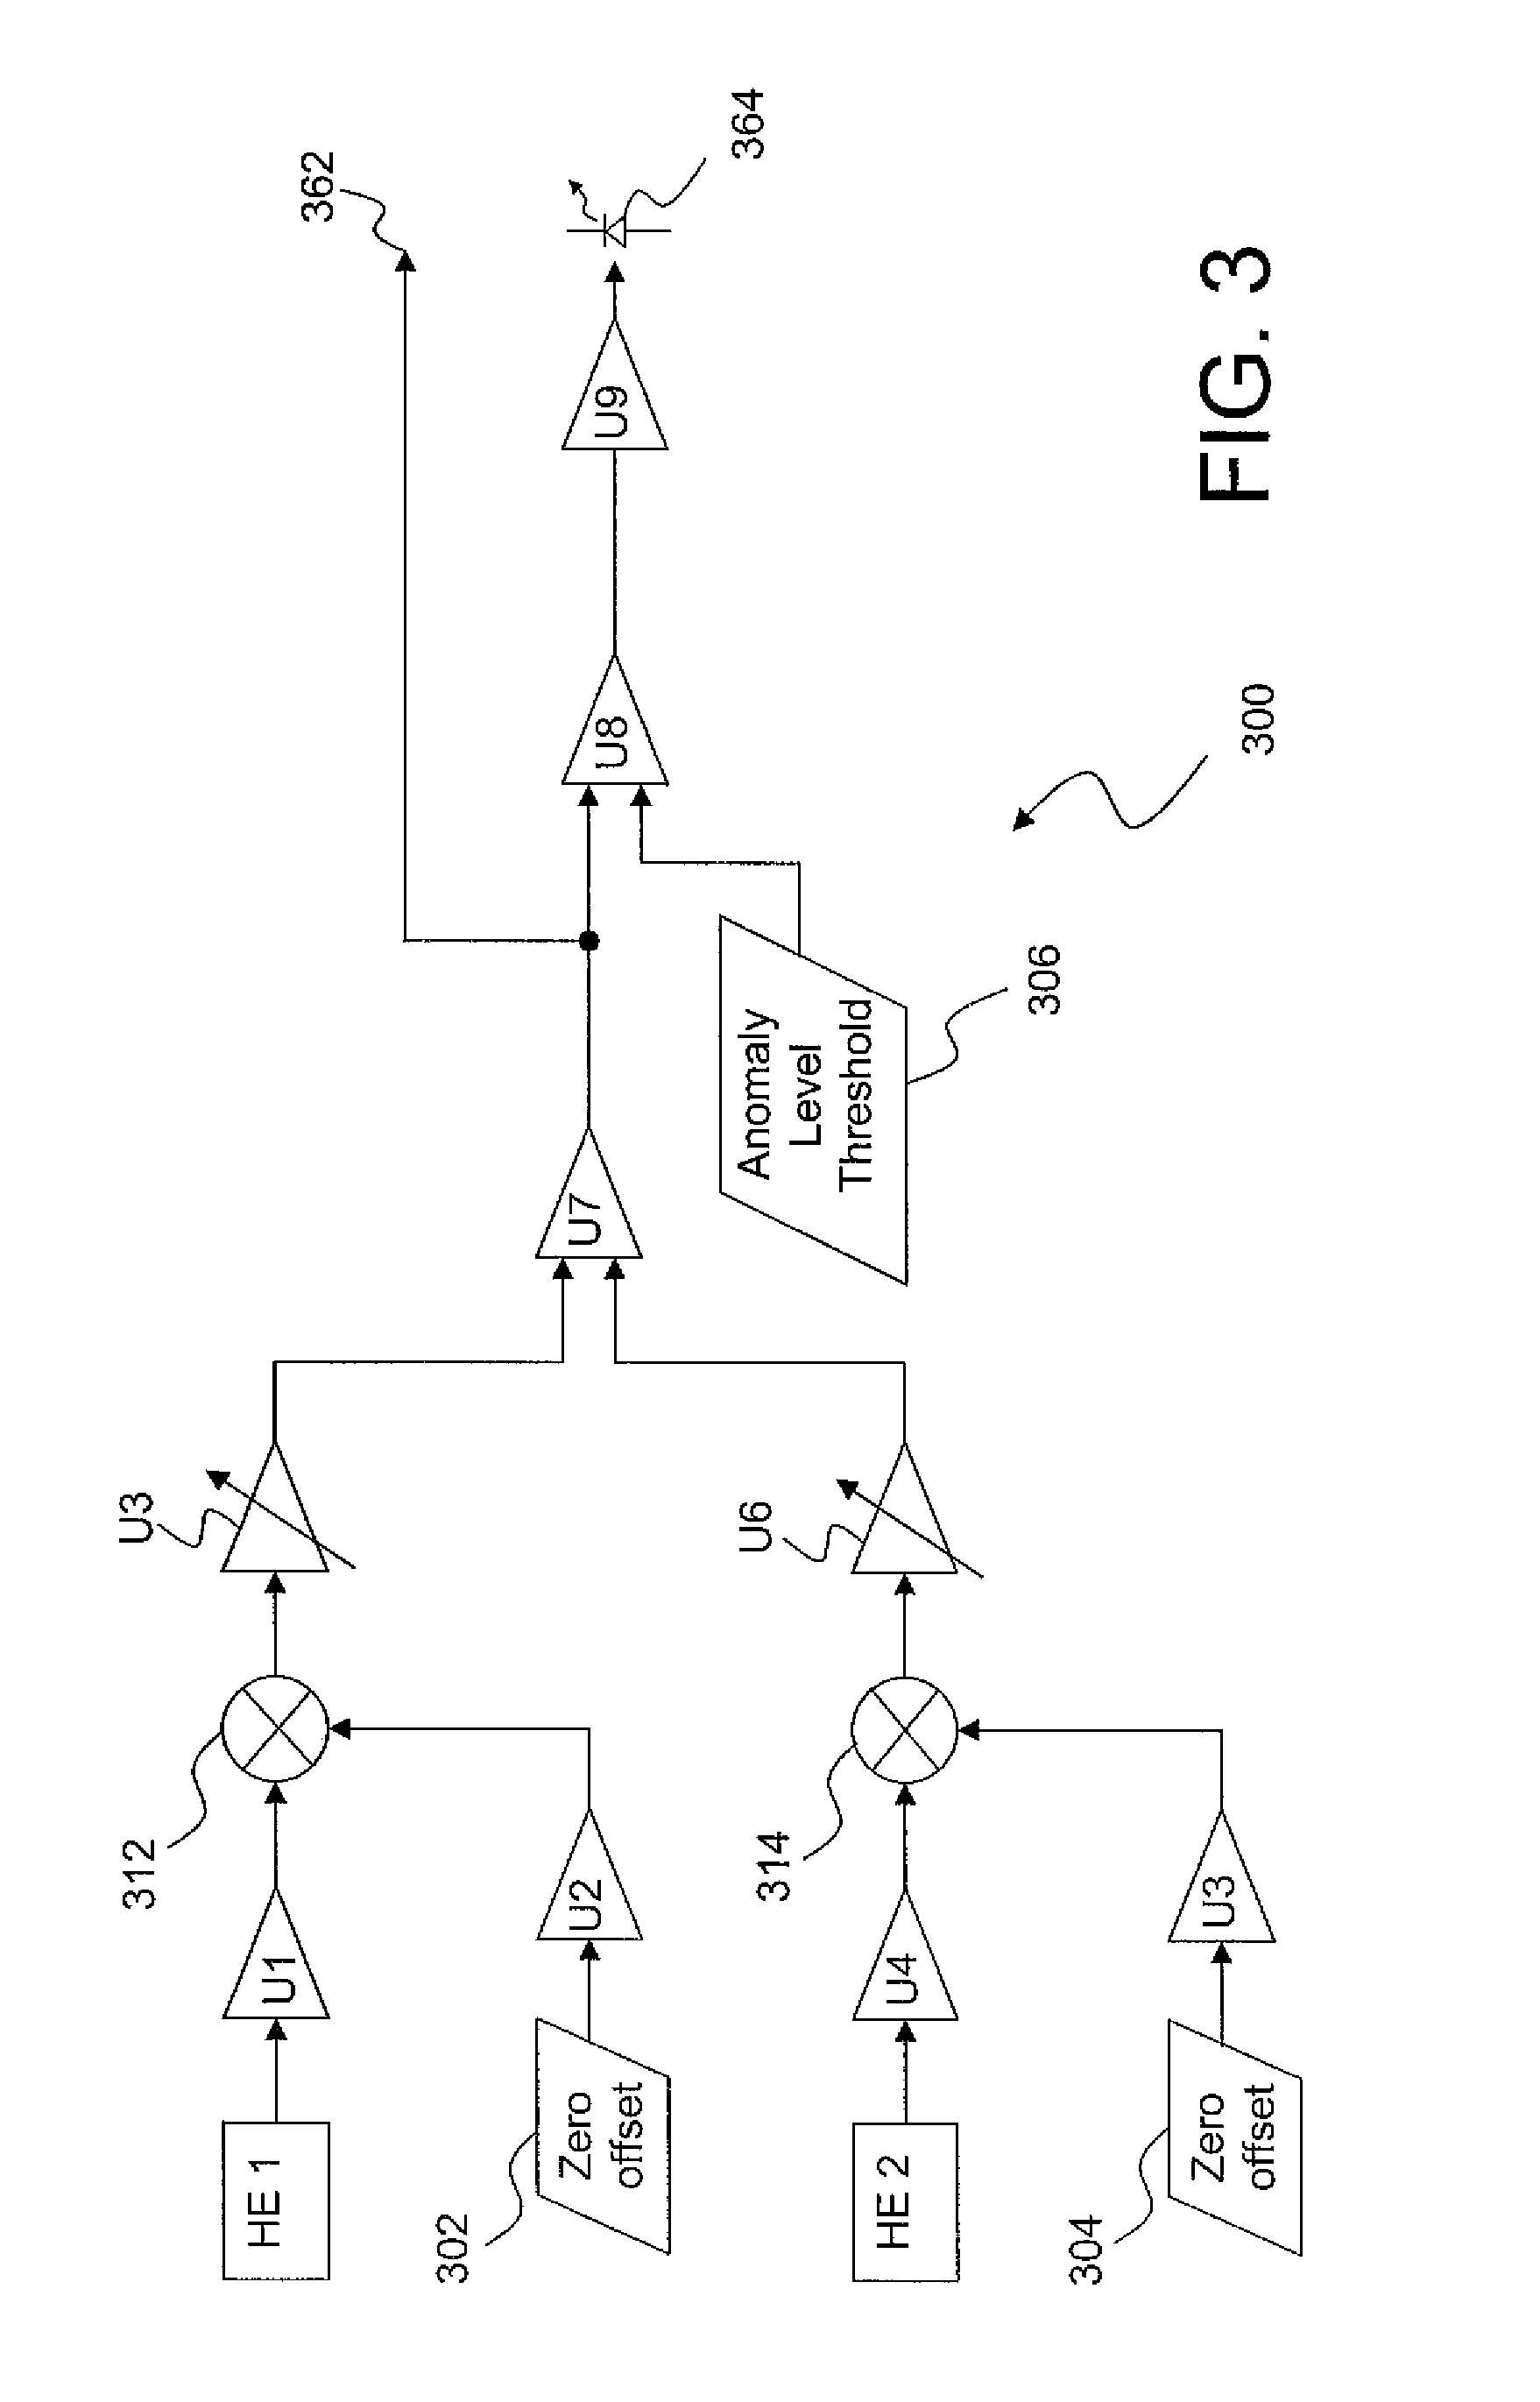 Tire metallic cable anomaly detection method and apparatus